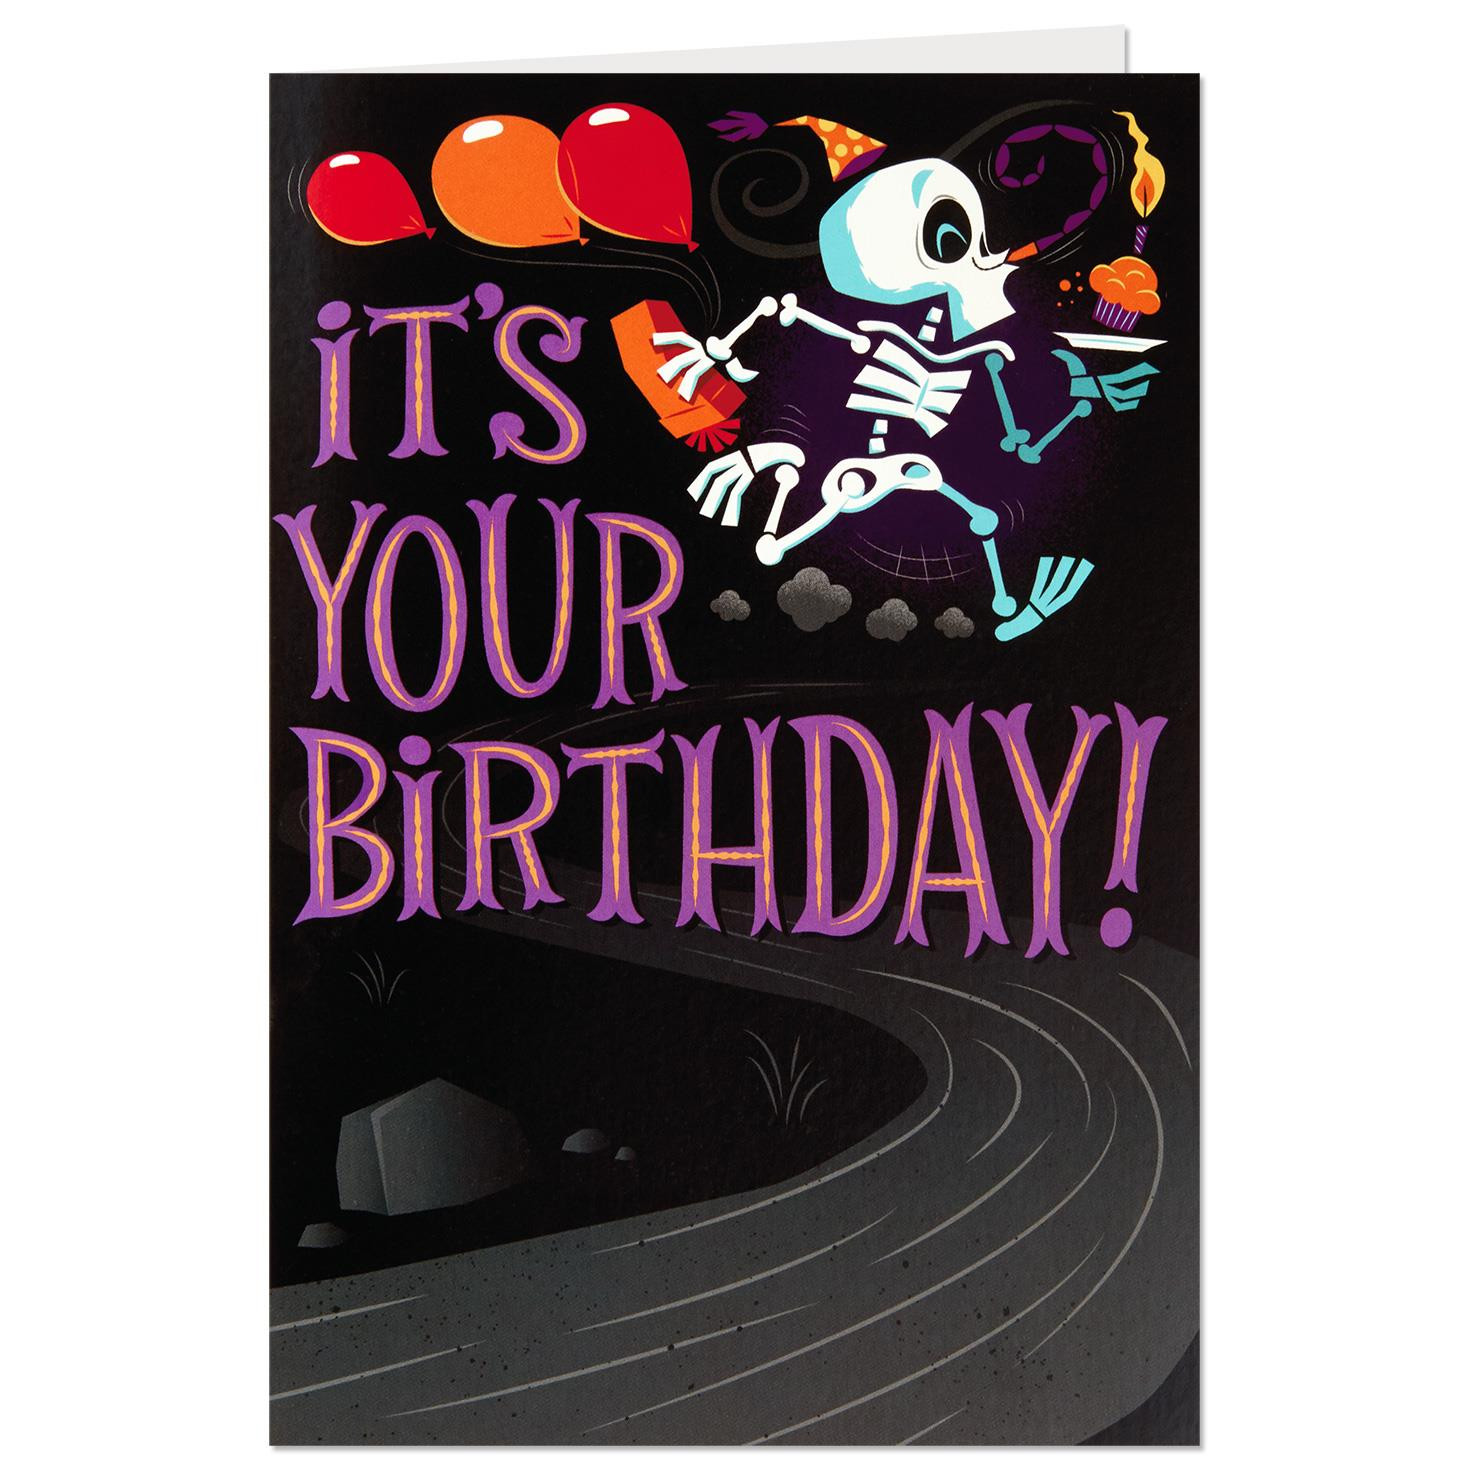 Halloween Birthday Card
 Party Skeletons Pop Up Halloween Birthday Card Greeting